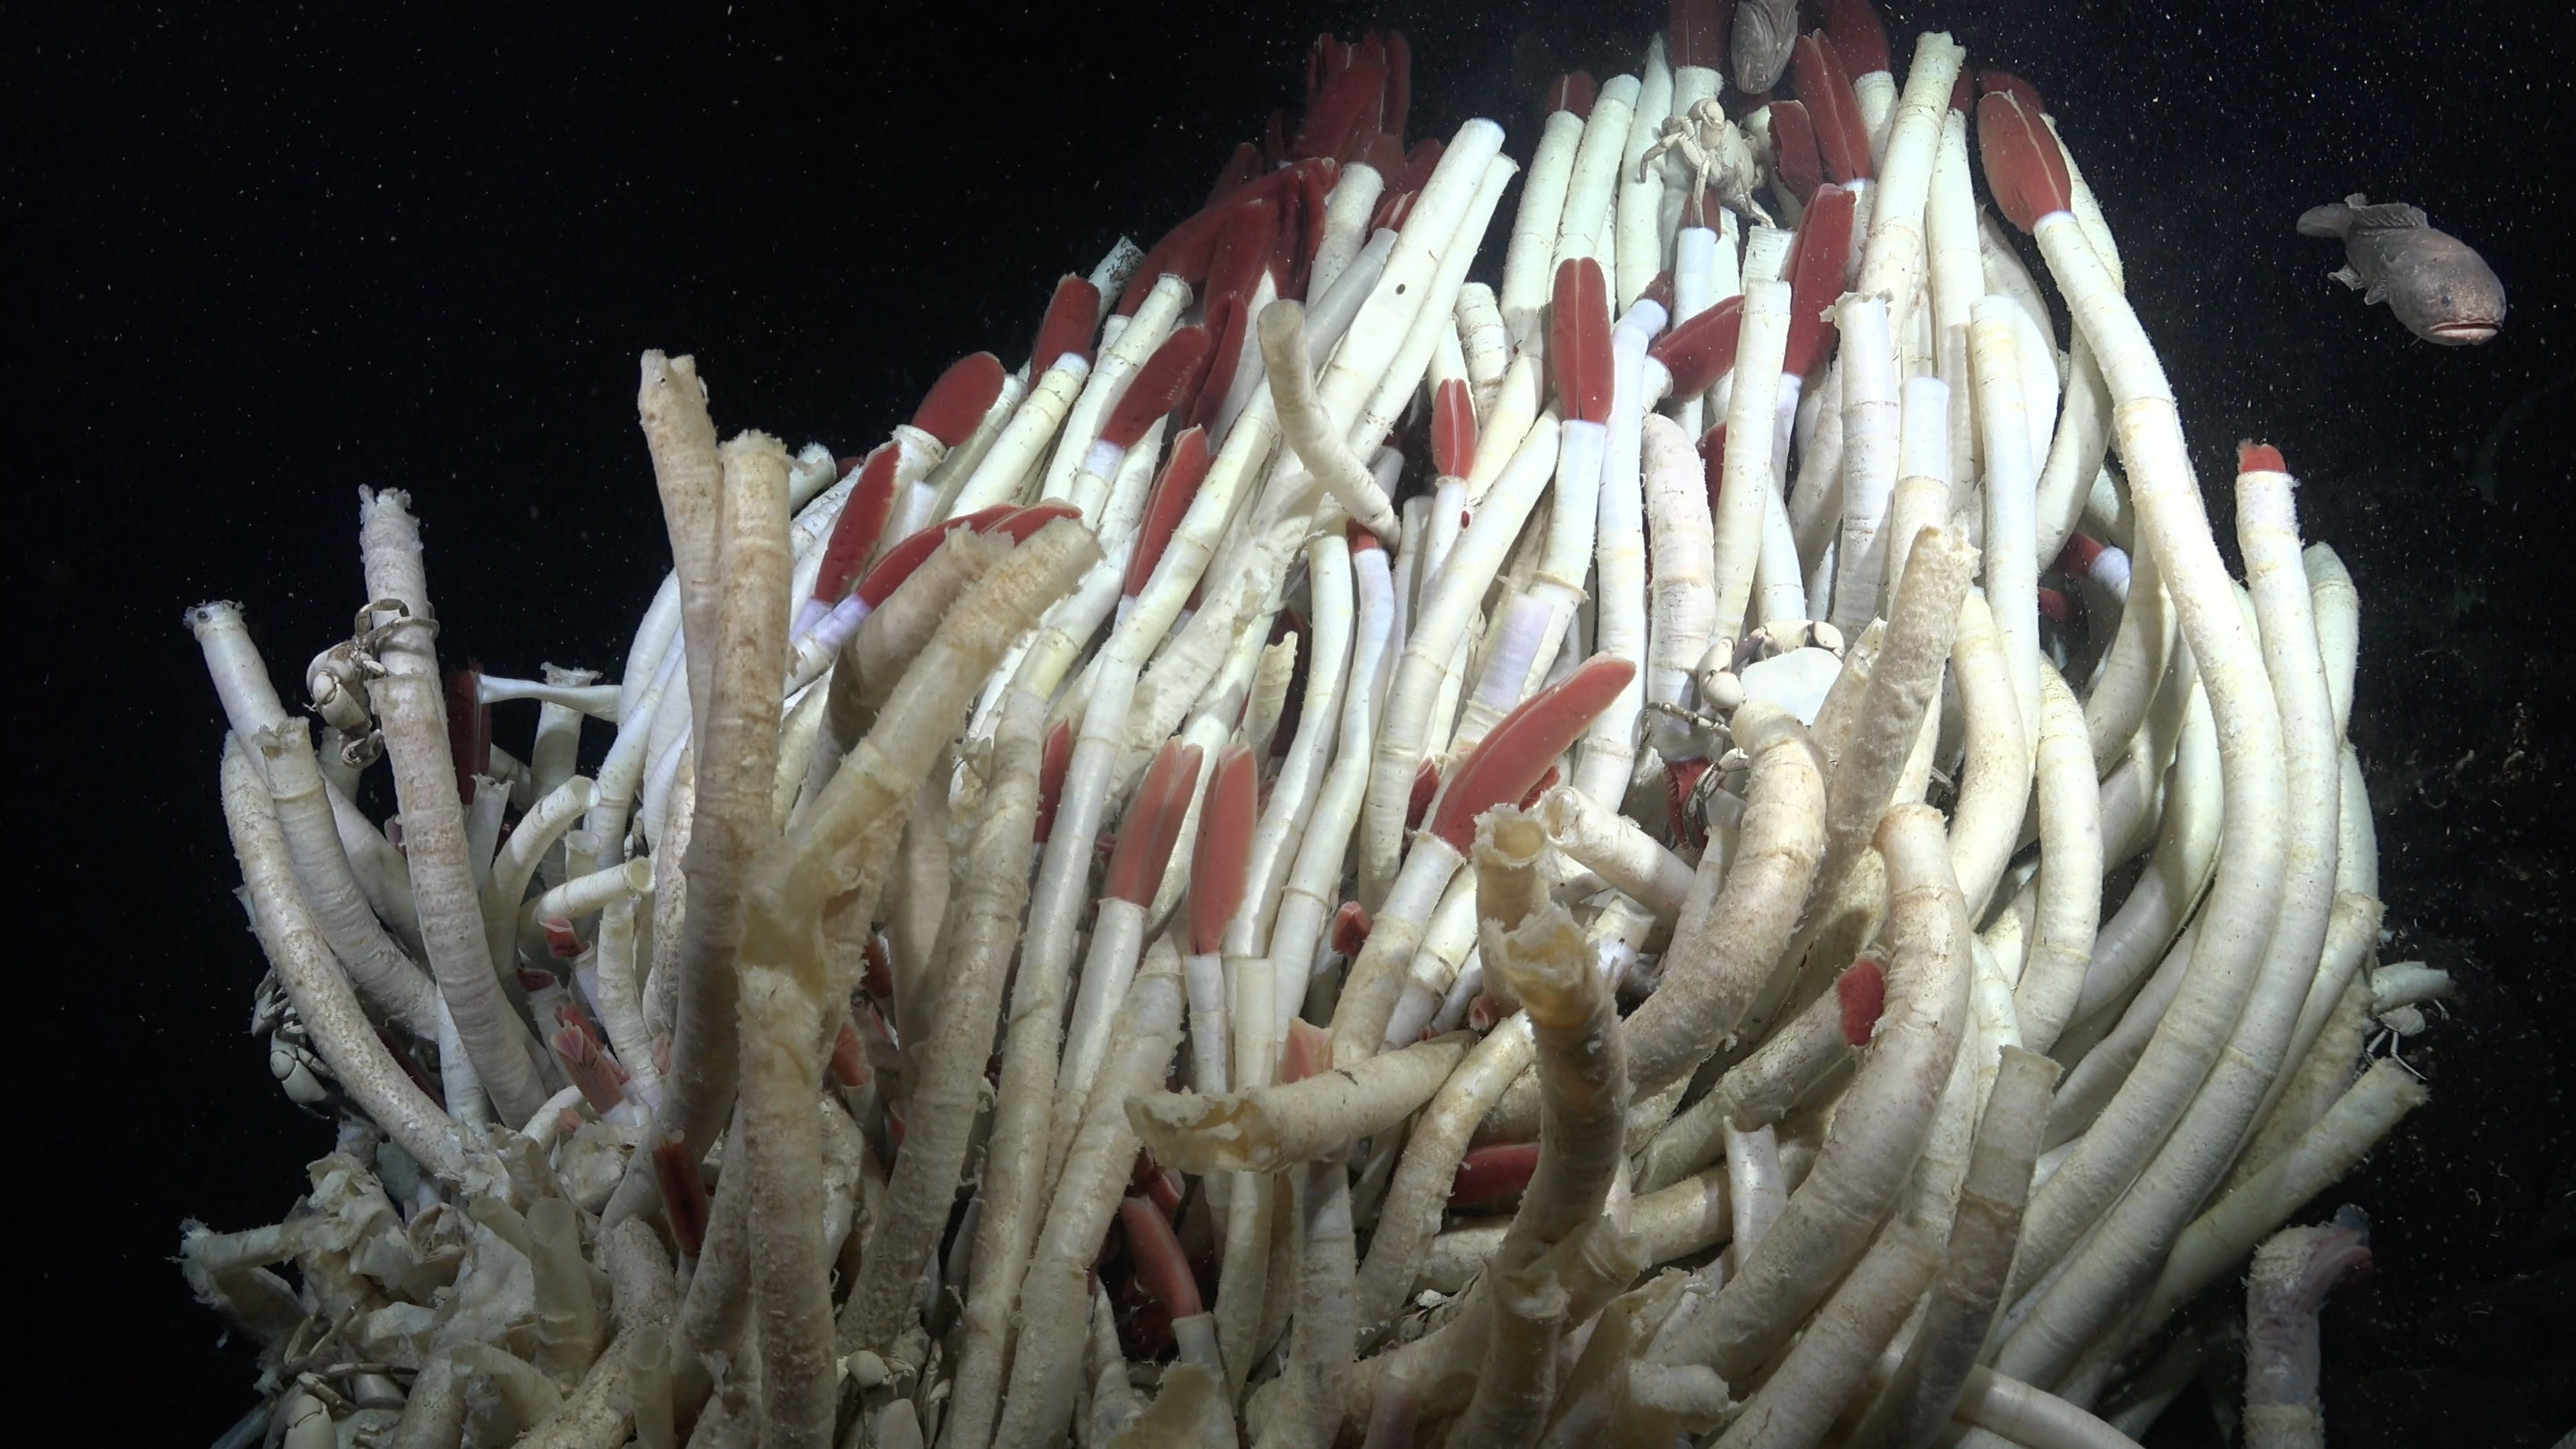 Cluster of giant tube worms off the Western Galápagos